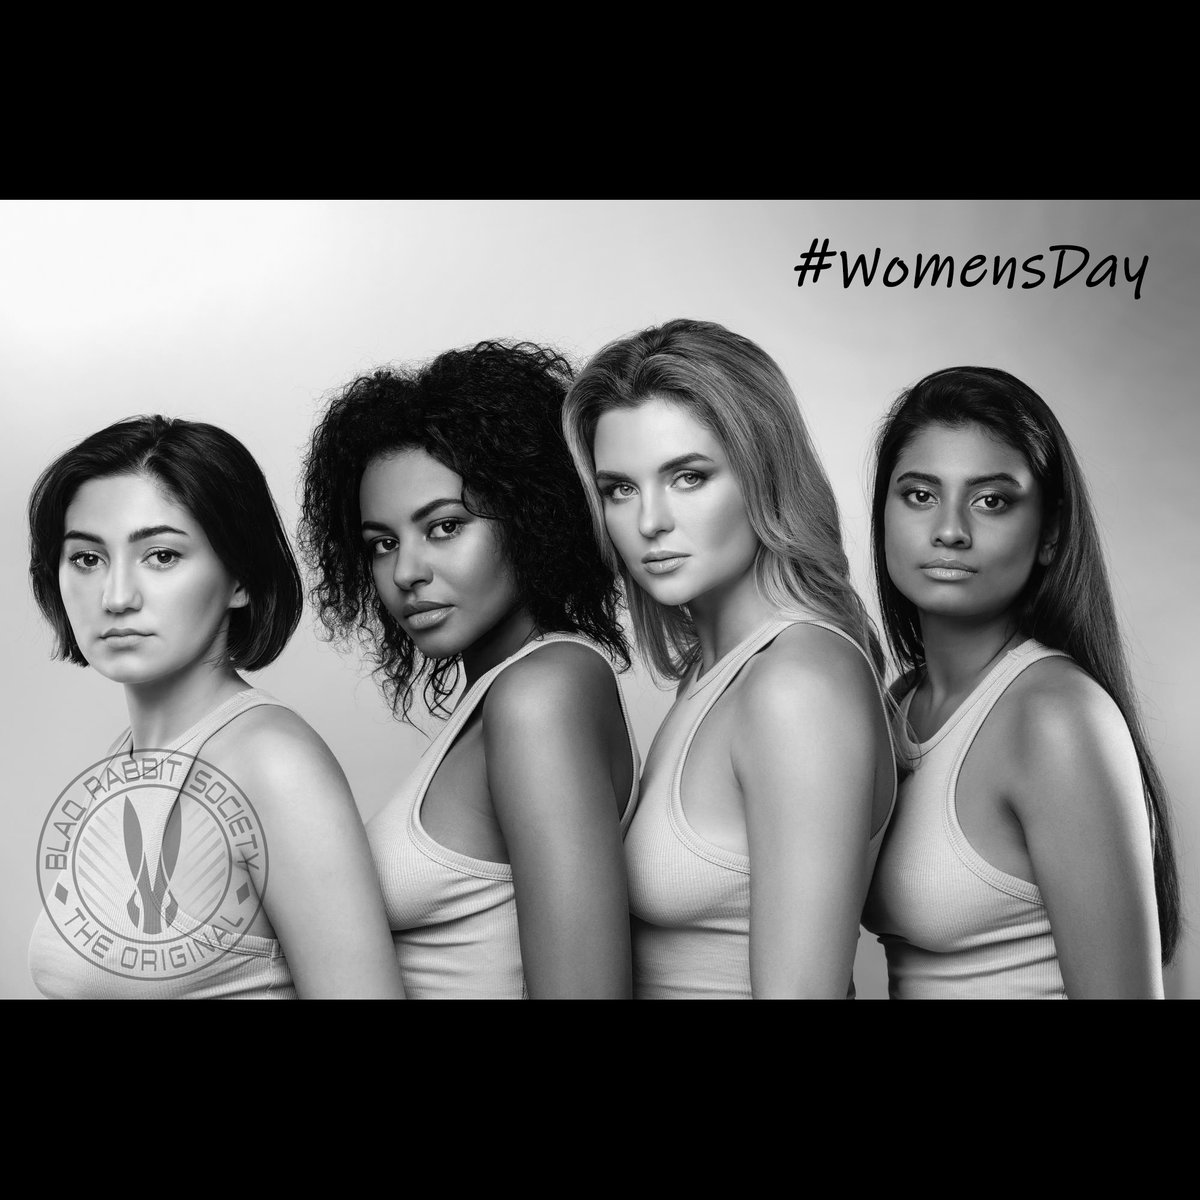 Mothers, wives, grandmothers, daughters, sisters, girlfriends, granddaughters, aunts, and nieces we THANK YOU. 🖤✨
#internationalwomensday #womensday #women #iwd #girlpower #love #equality #eachforequal #photography #model #crypto #nft #nftart #nftcommunity #bethedifference